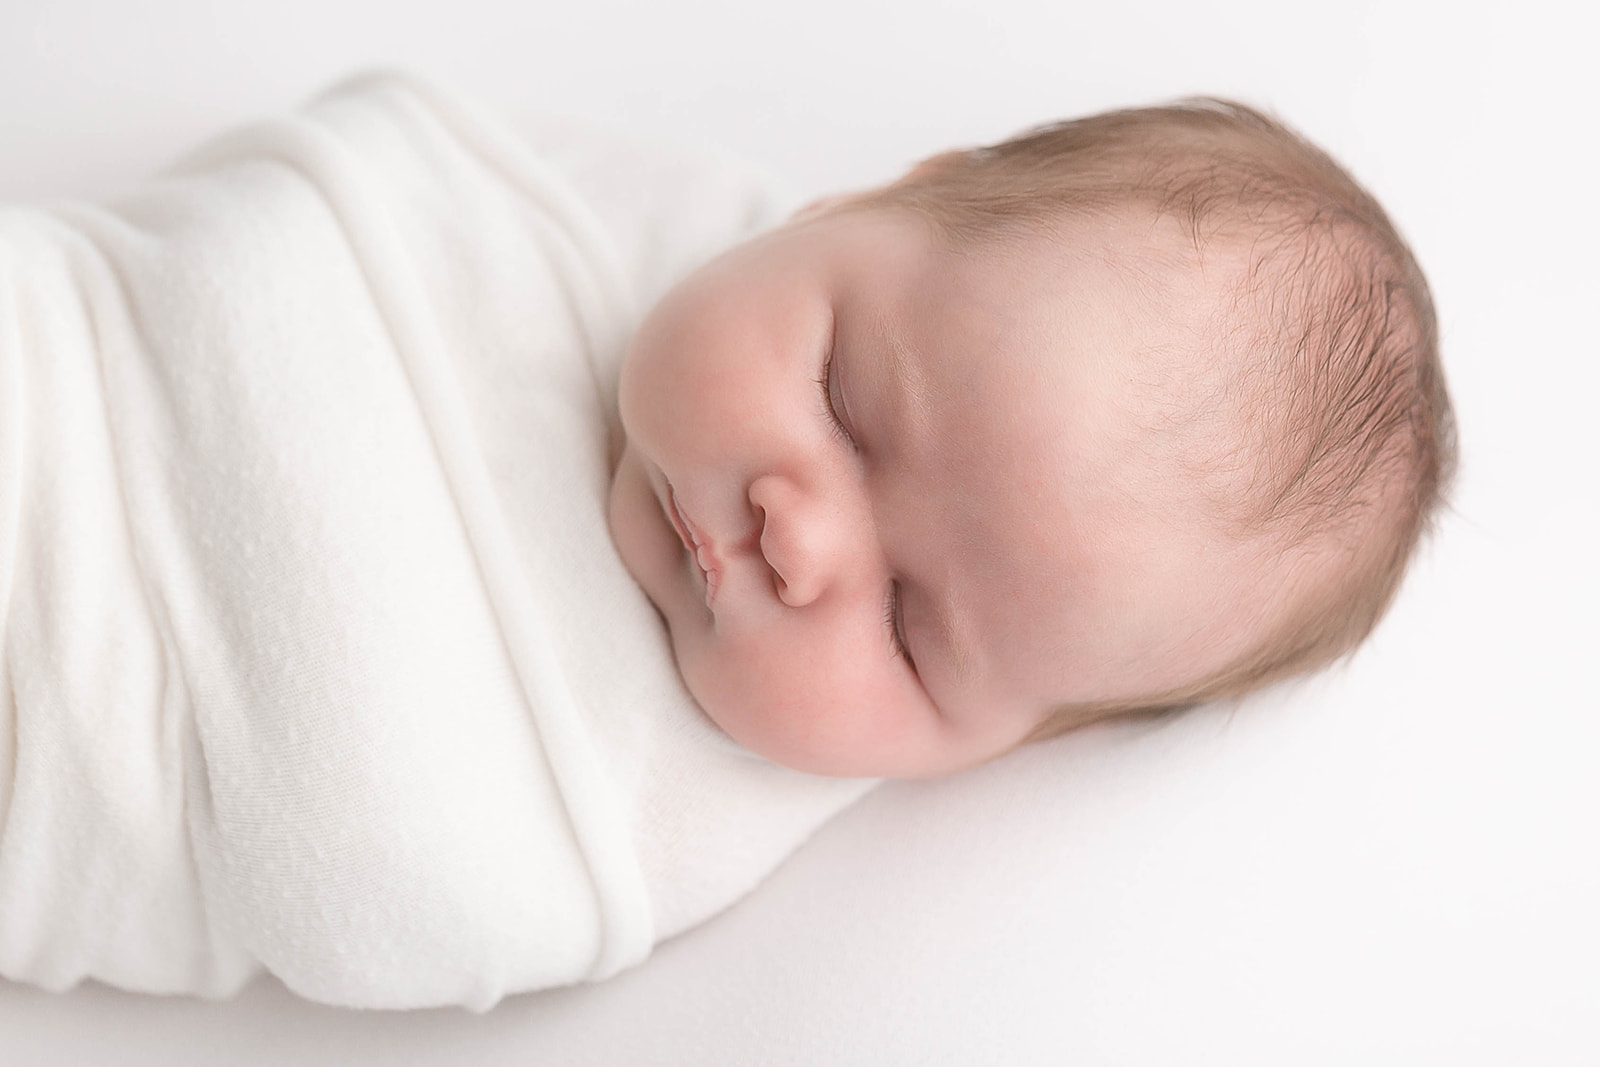 A newborn baby sleeps wrapped up tight in a white swaddle Portland Midwifery